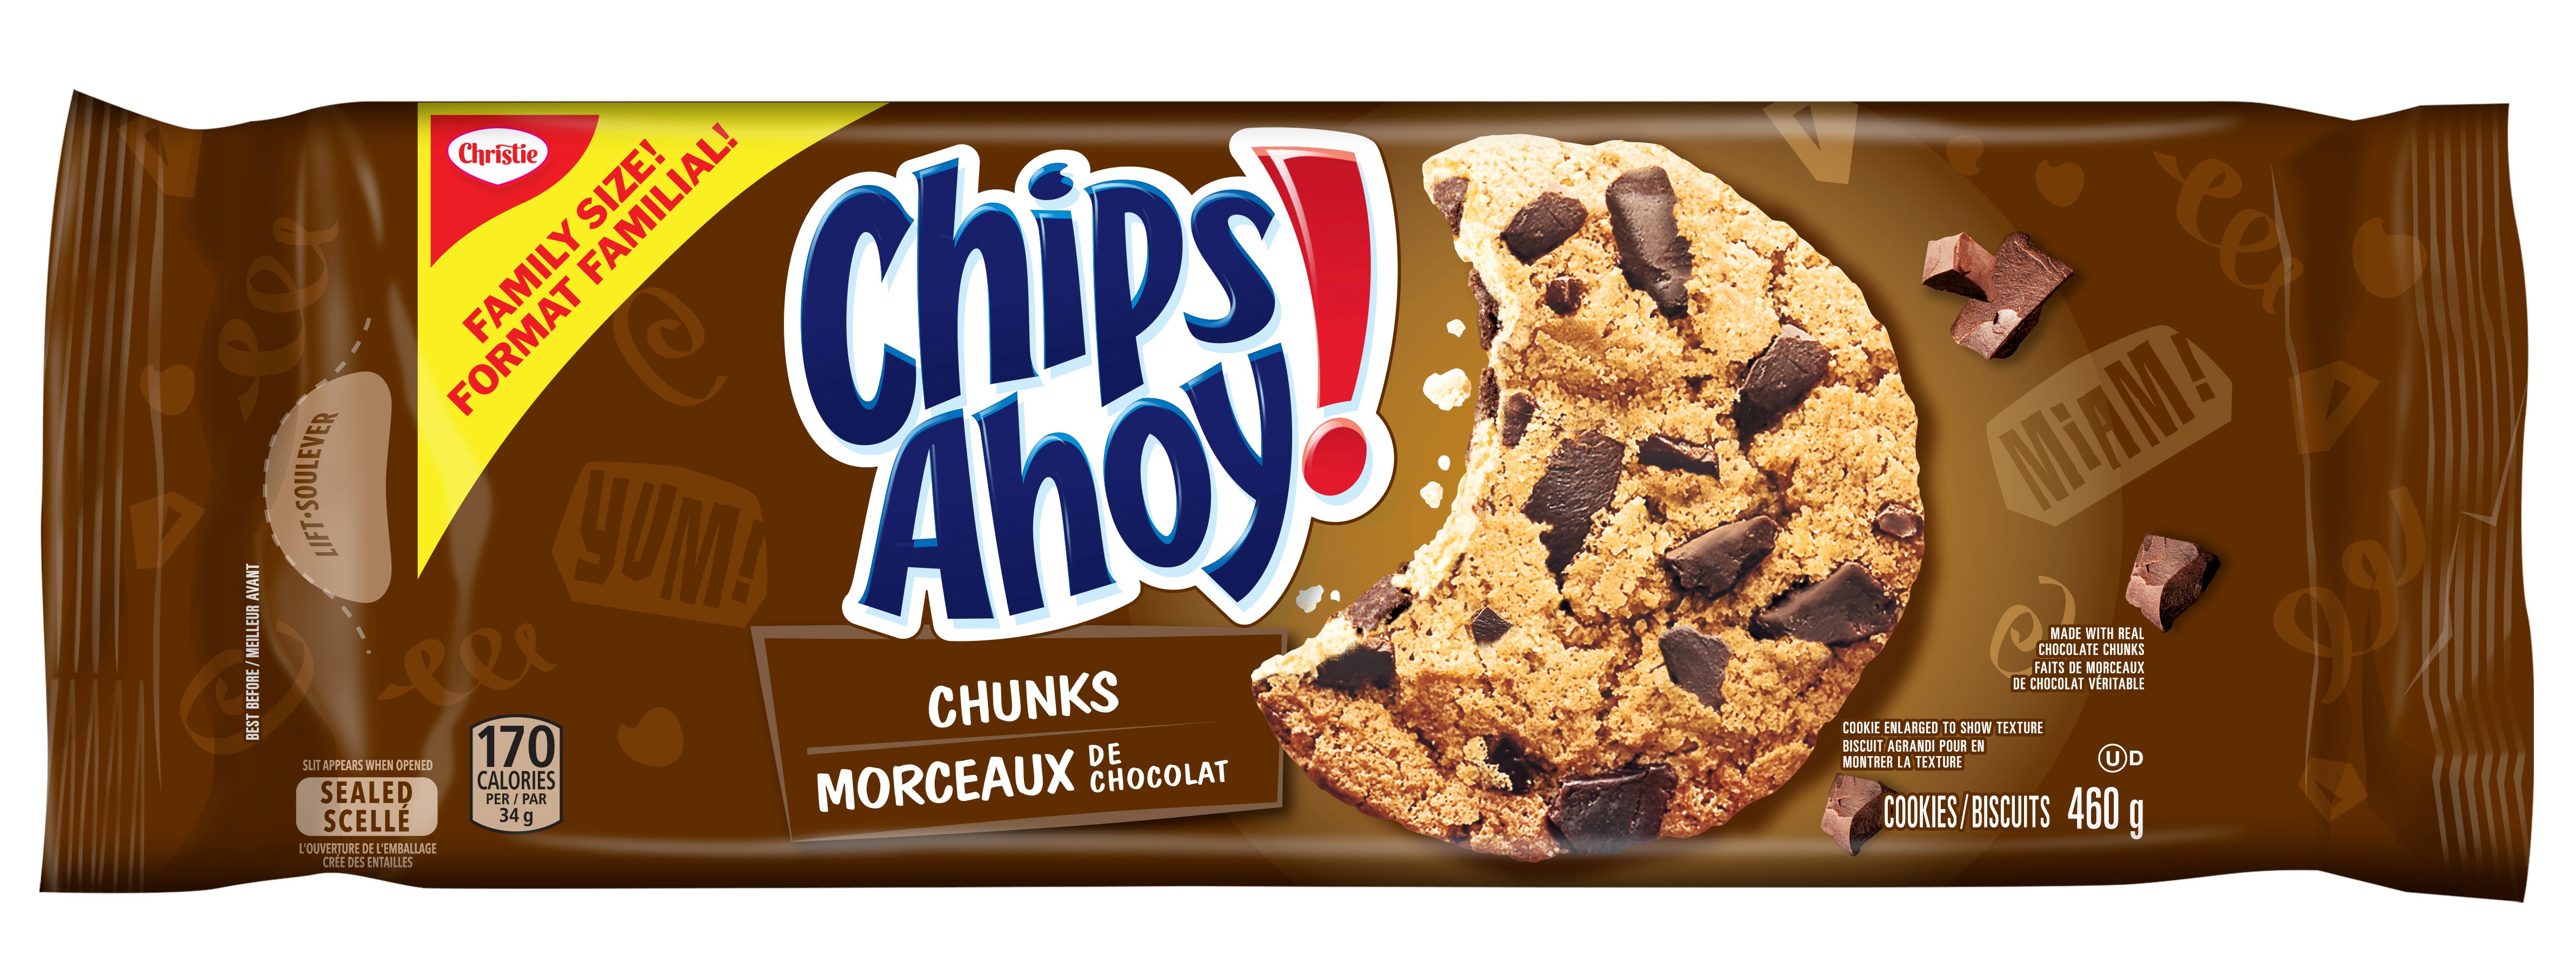 Chips Ahoy! Chunks Chocolate Chip Cookies Family Size, 460G